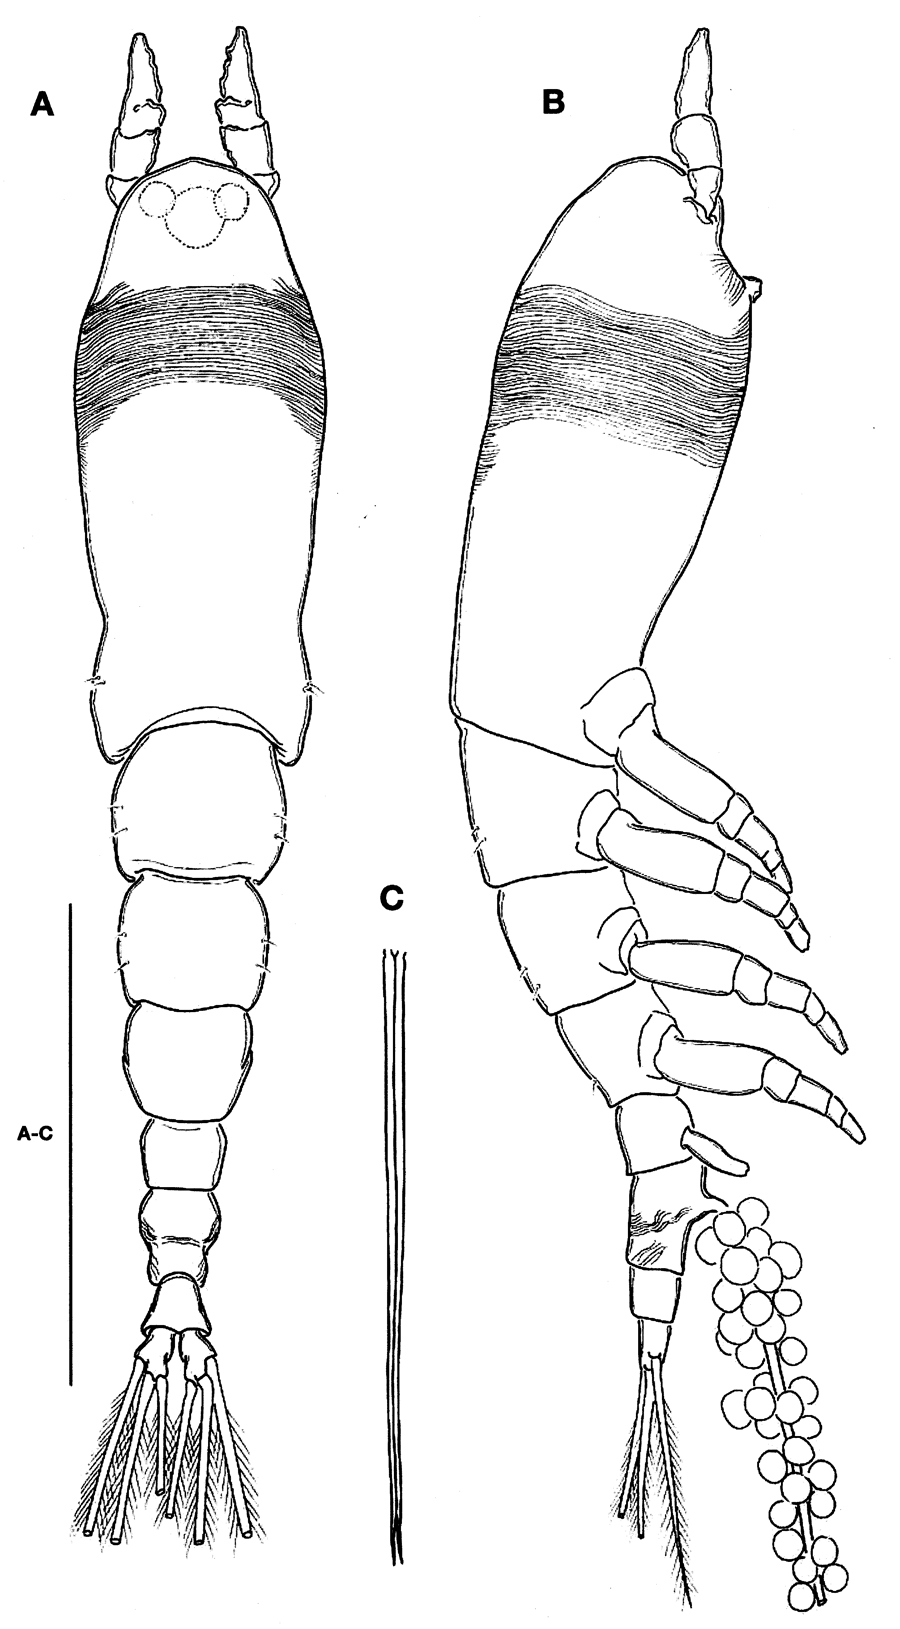 Species Cymbasoma striifrons - Plate 1 of morphological figures